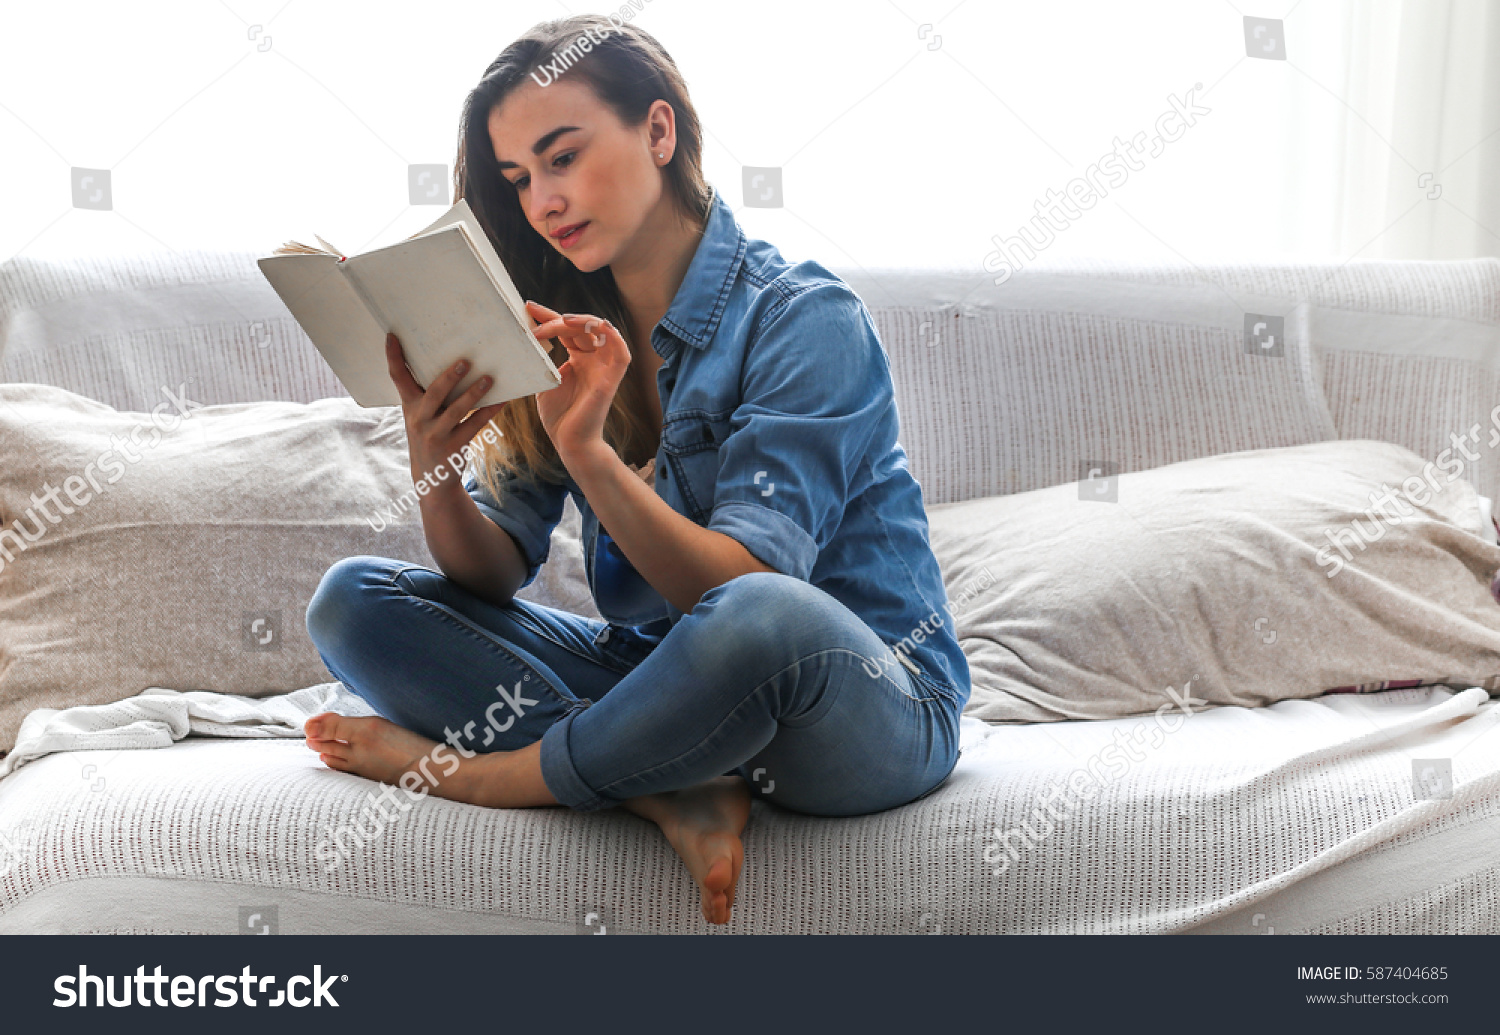 White cozy bed and a beautiful girl, reading a book, concepts of home and comfort, place for text #587404685